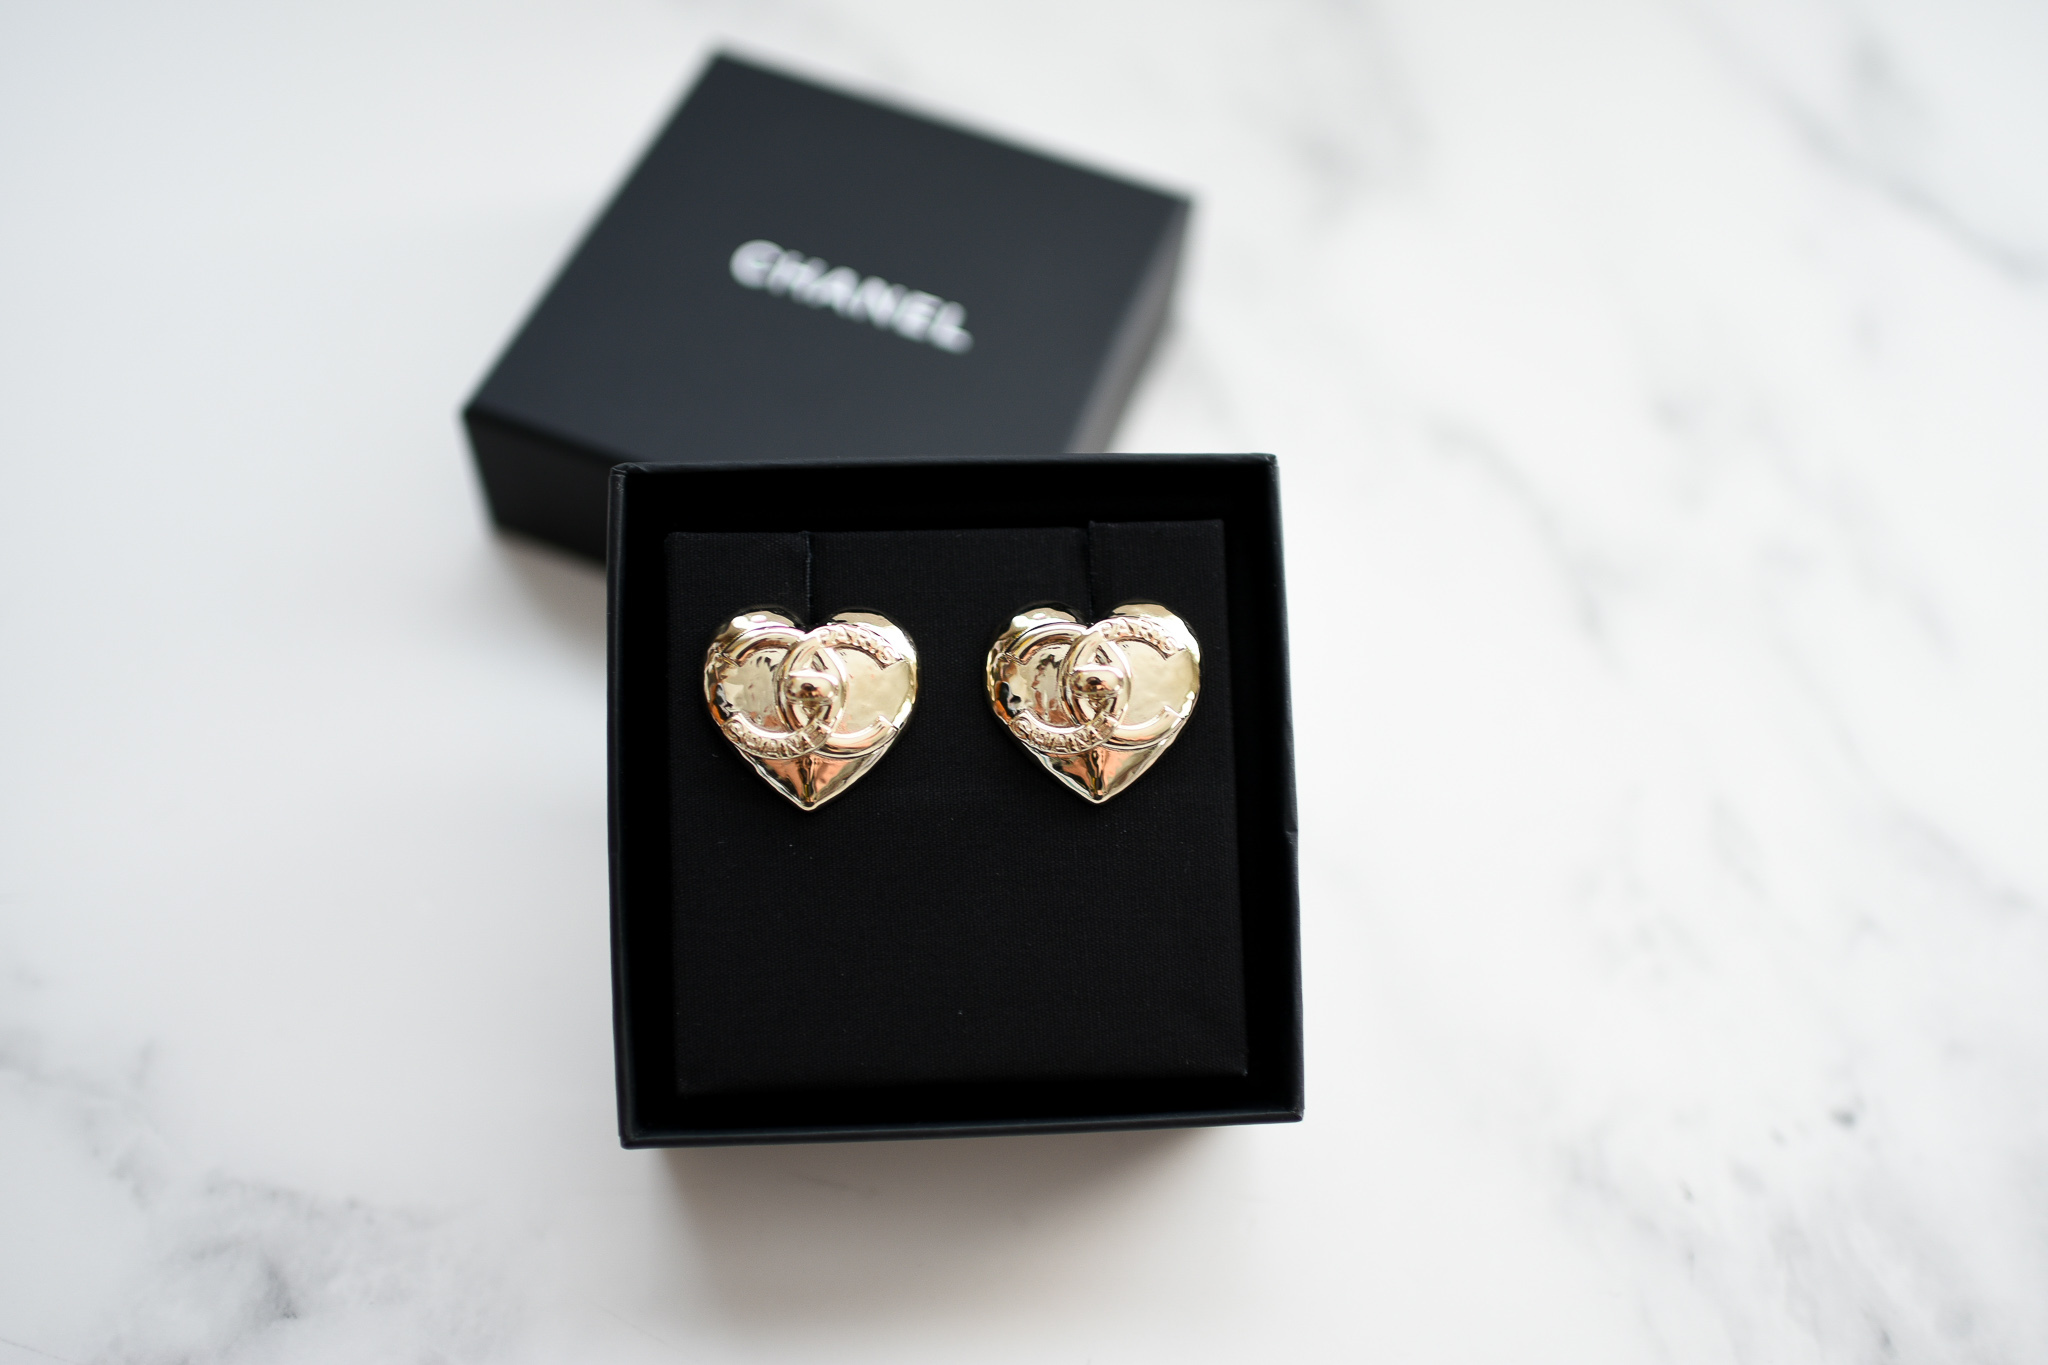 Chanel Statement CC Turnlock Heart Earrings in Gold (No Stone), New in Box  GA001